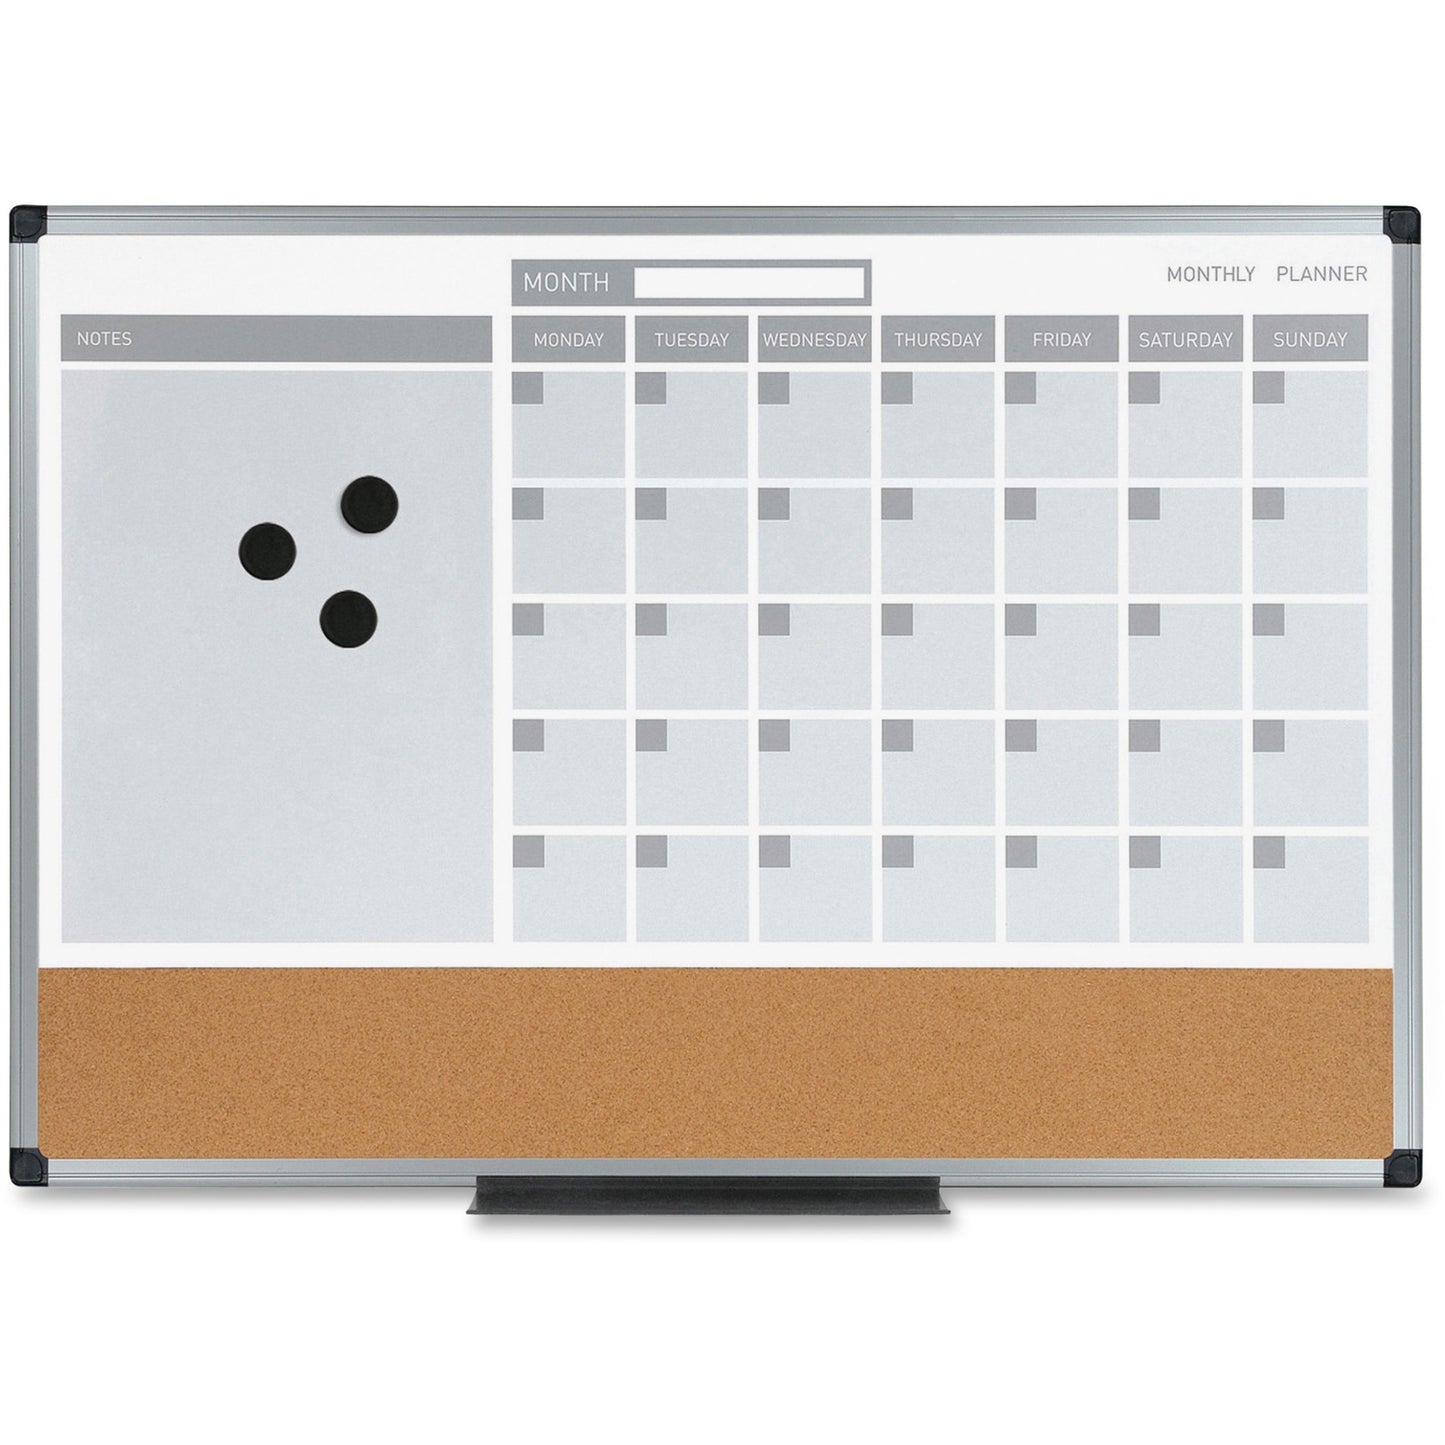 MasterVision 3-in-1 Combo Monthly Calendar Board